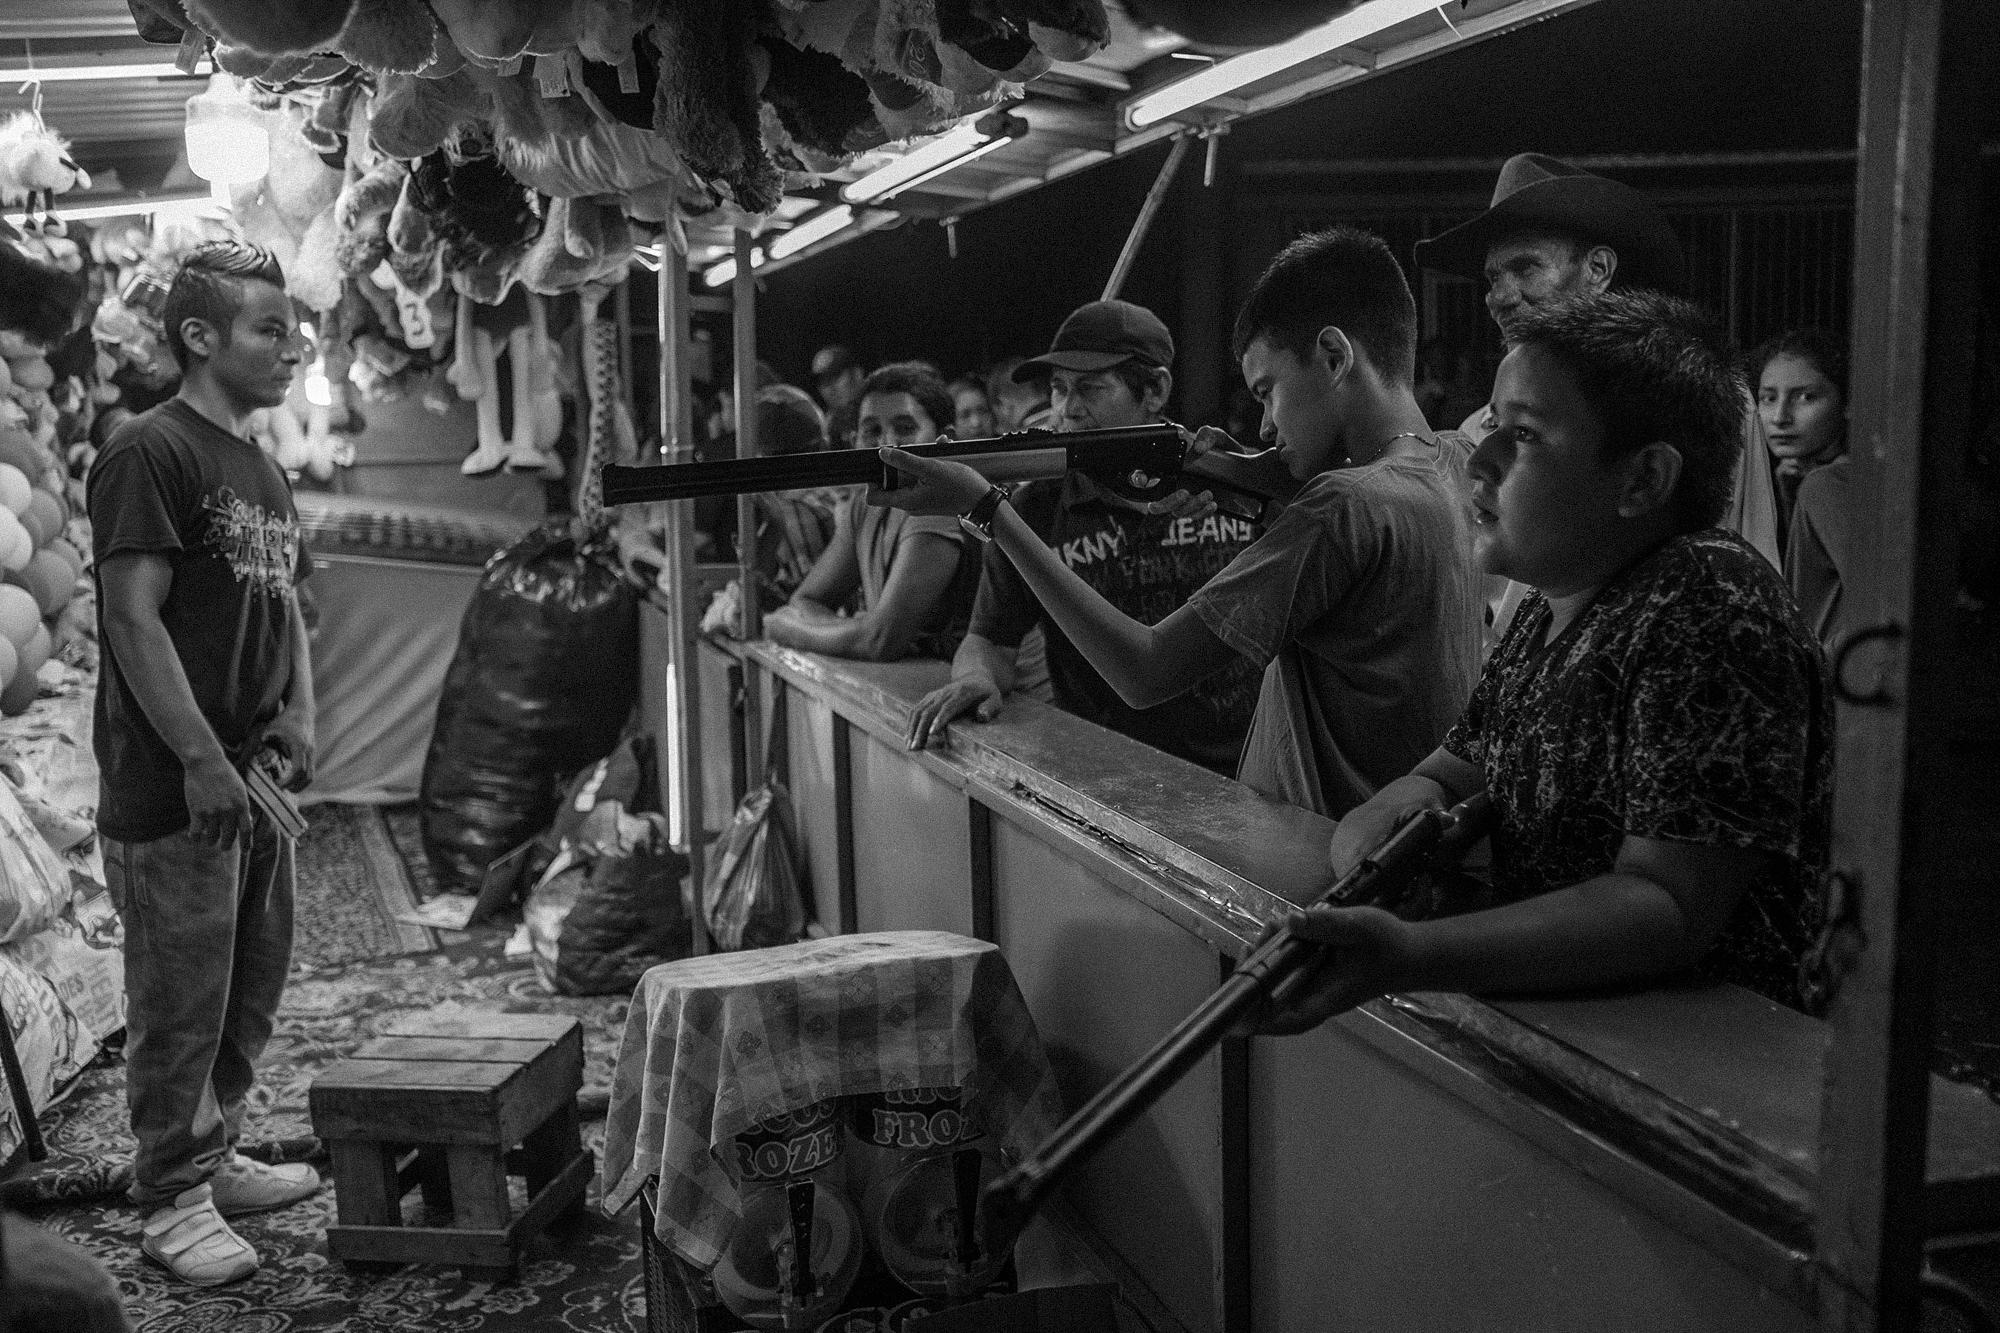 Youth from Santa Marta play a target shooting game during the festival of the return. One dollar buys three shots at hitting the target with a toy gun. The prize: a stuffed teddy bear.